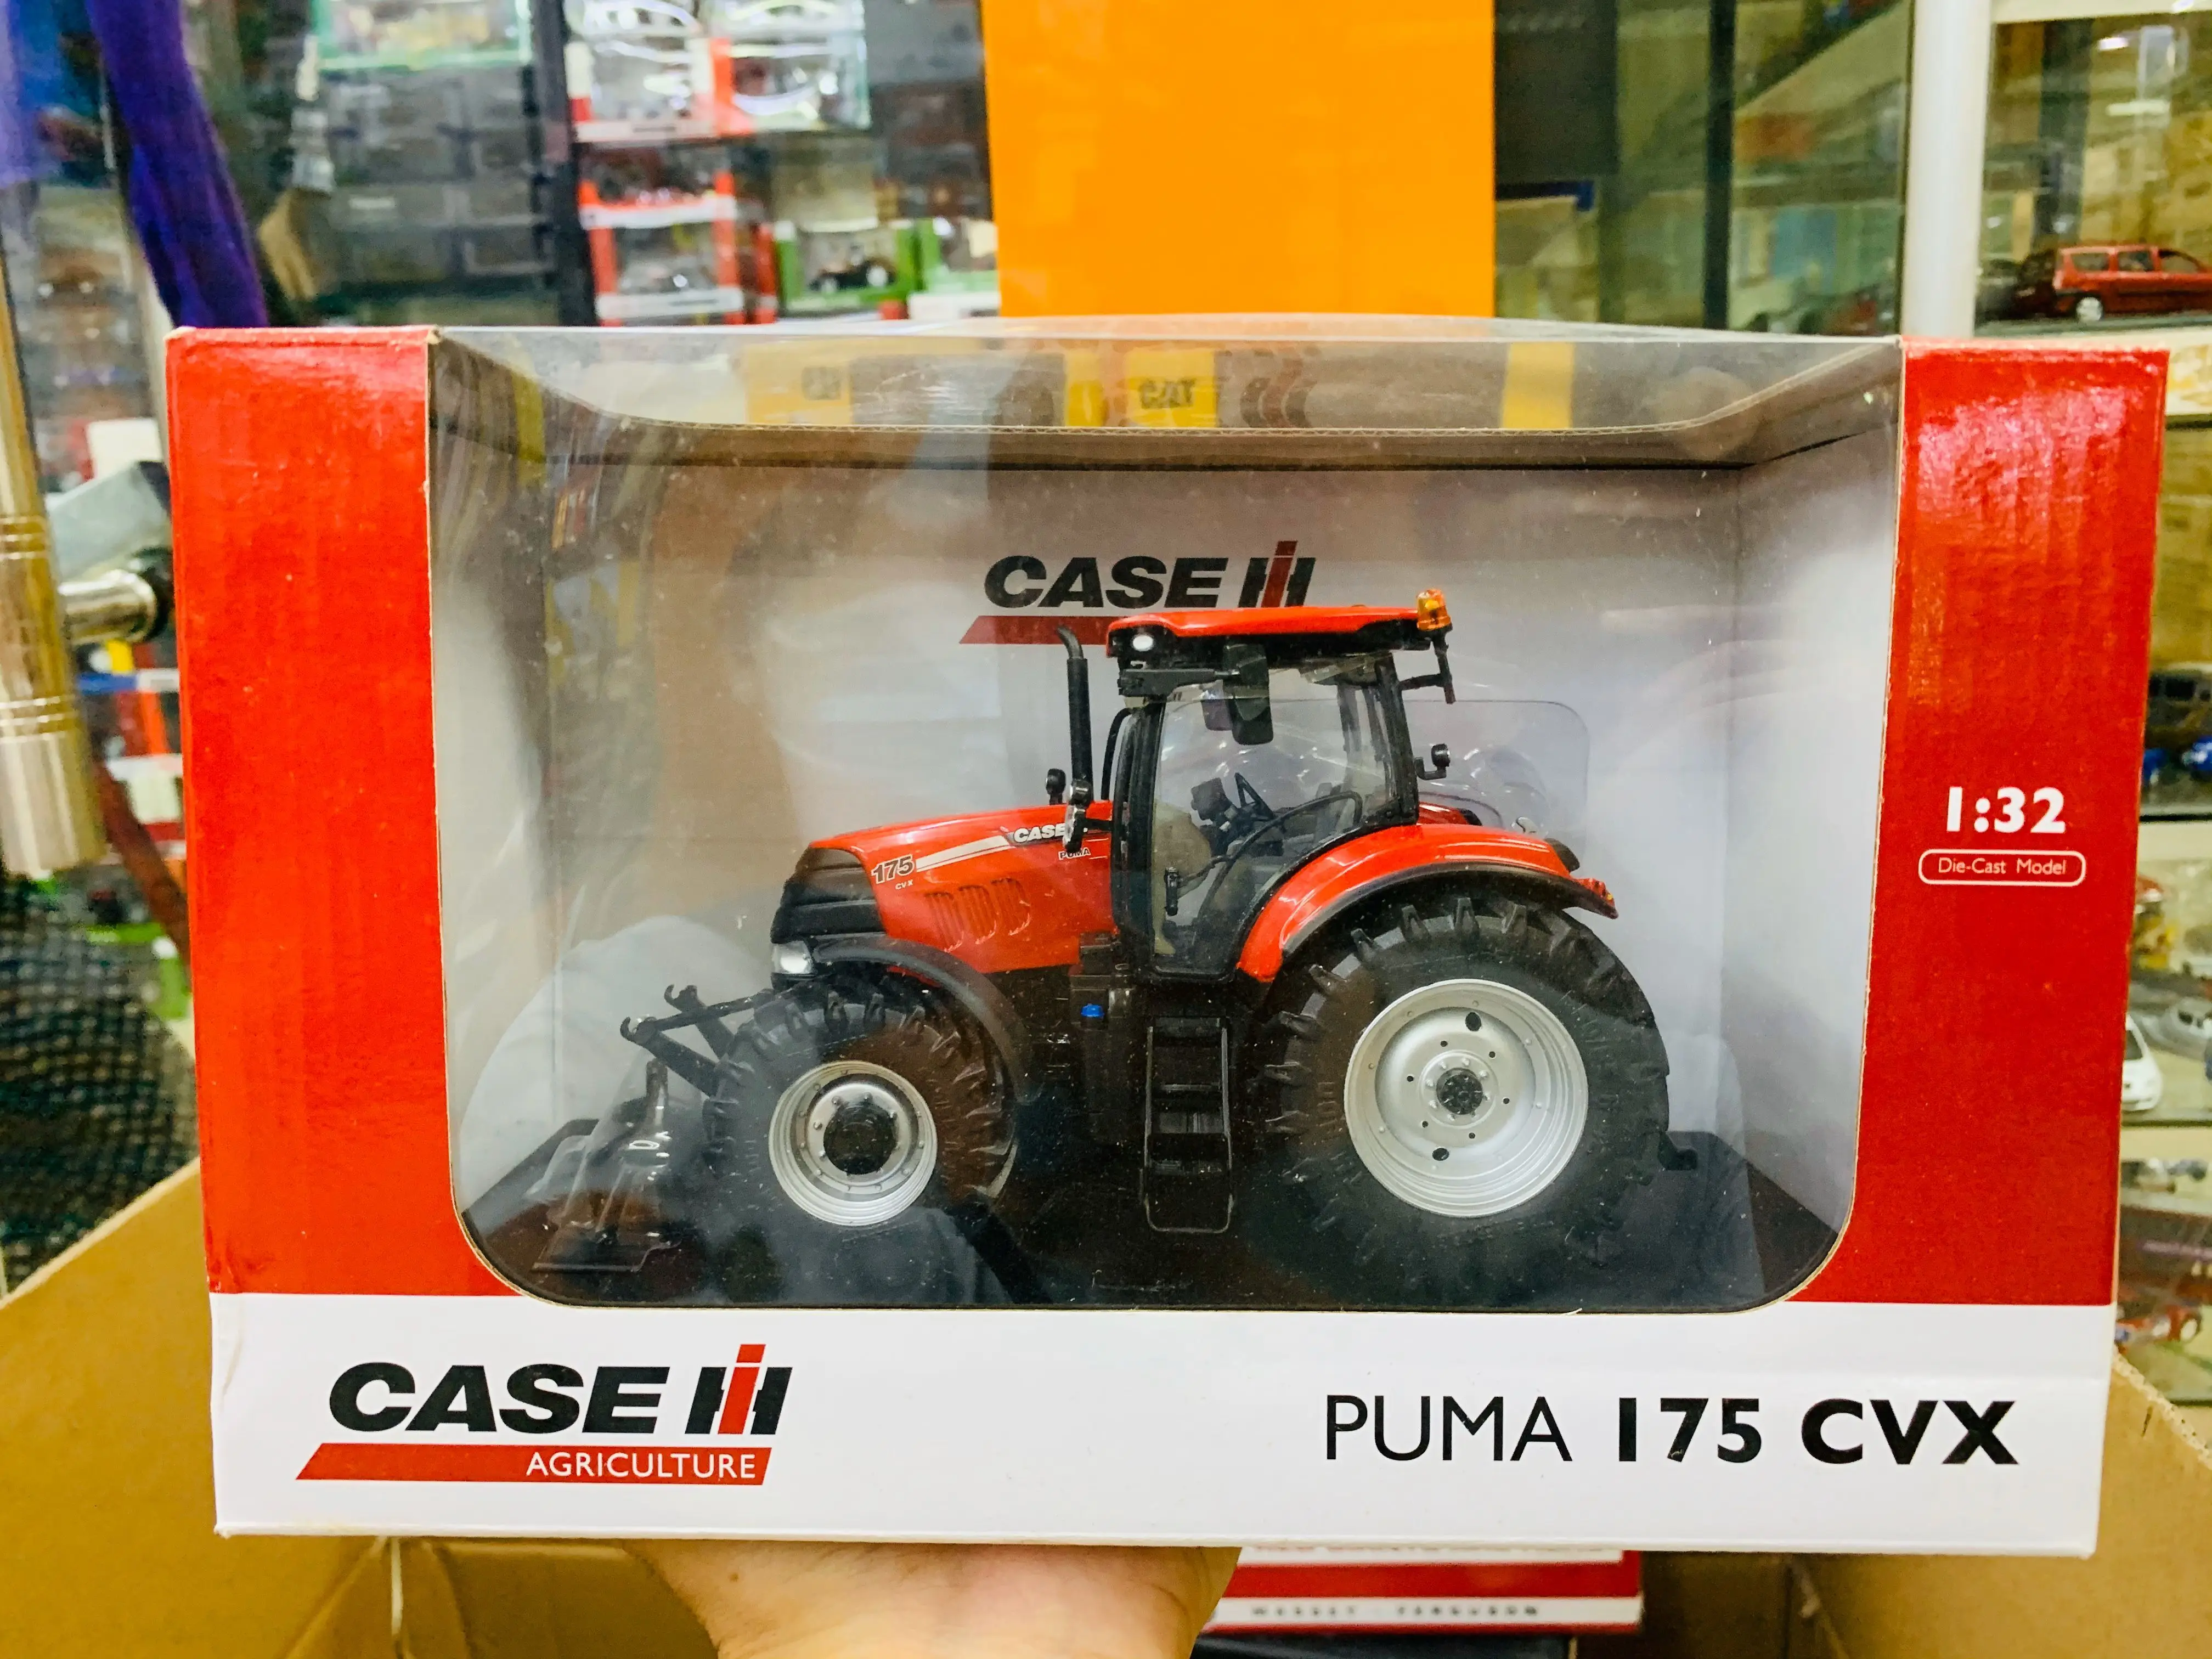 

1:32 Scale Die-Cast Model Case IH Puma 175 CVX 2017 Version Agricultural Tractor UH5261 New in Box